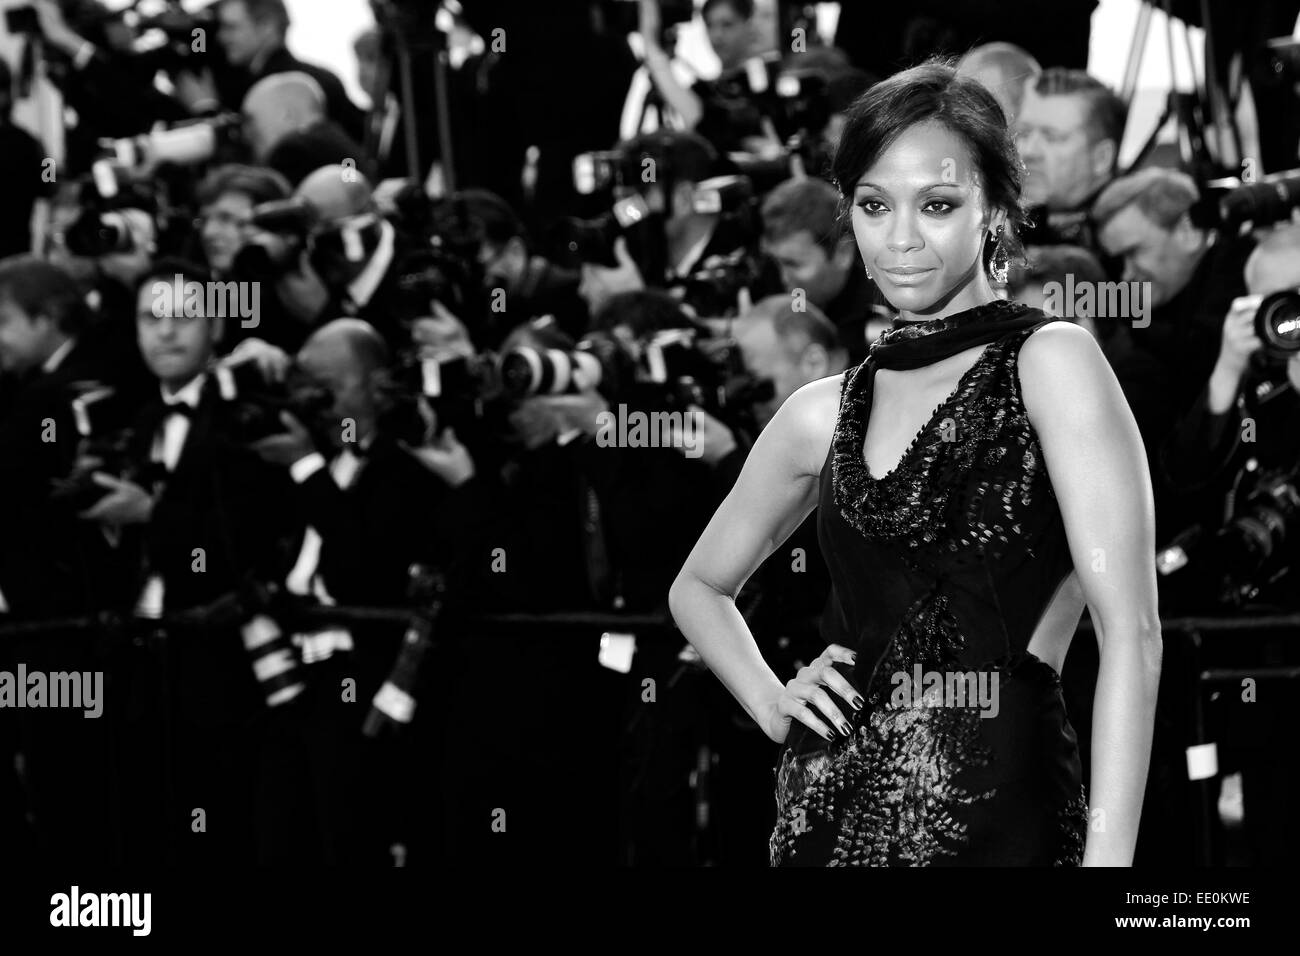 CANNES, FRANCE - MAY 15: Zoe Saldana attends the 'Mr Turner' premiere during the 67th Annual Cannes Film Festival on May 15, 201 Stock Photo